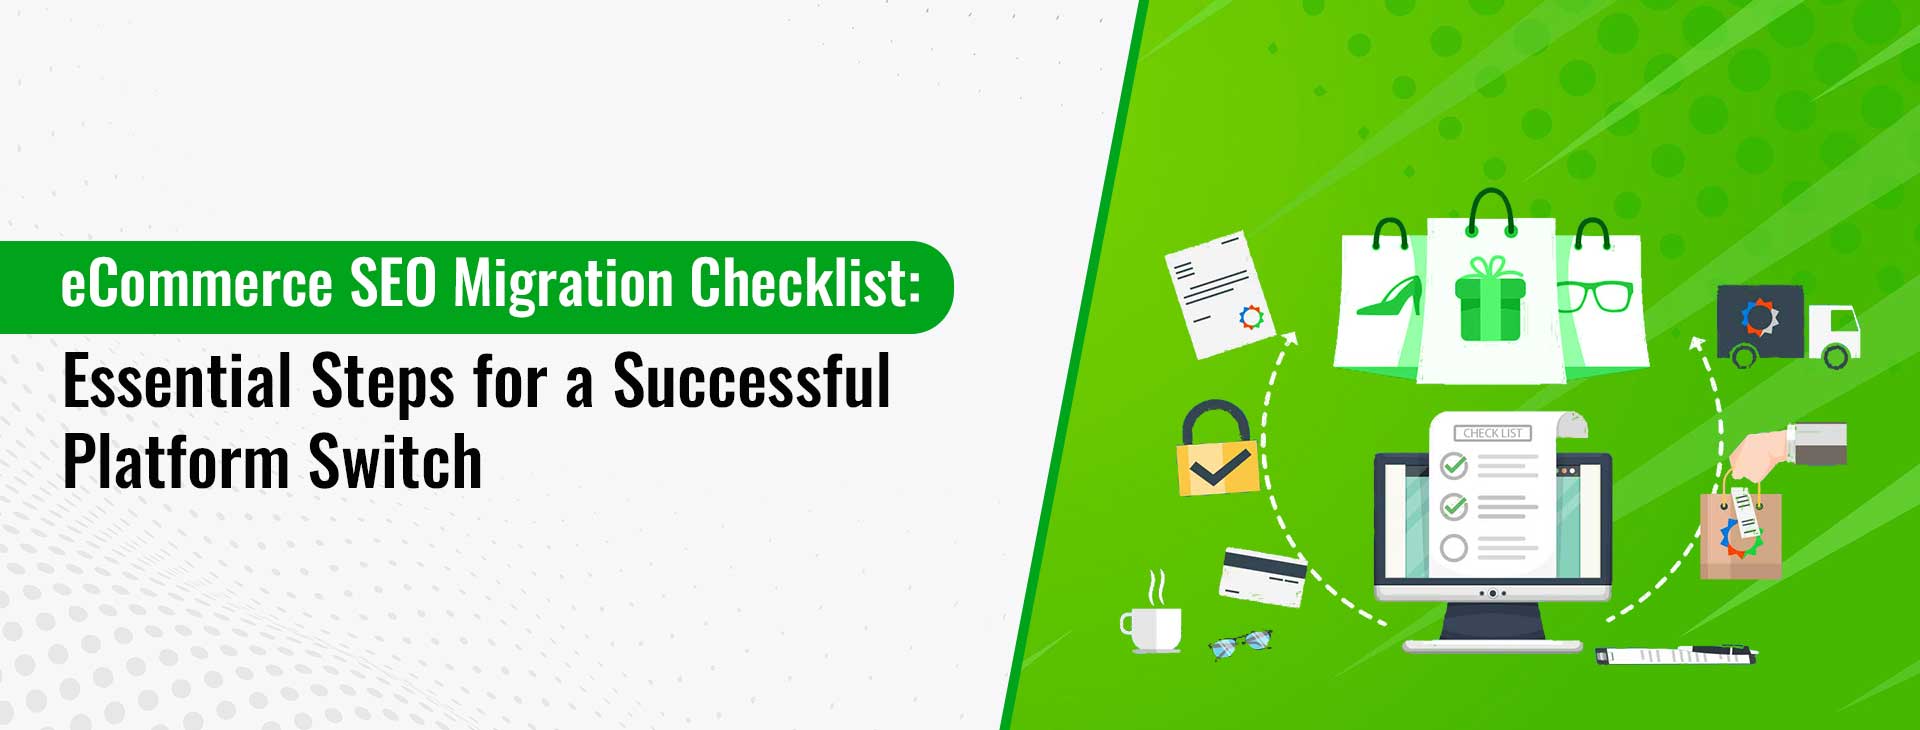 eCommerce SEO Migration Checklist: Essential Steps for a Successful Platform Switch